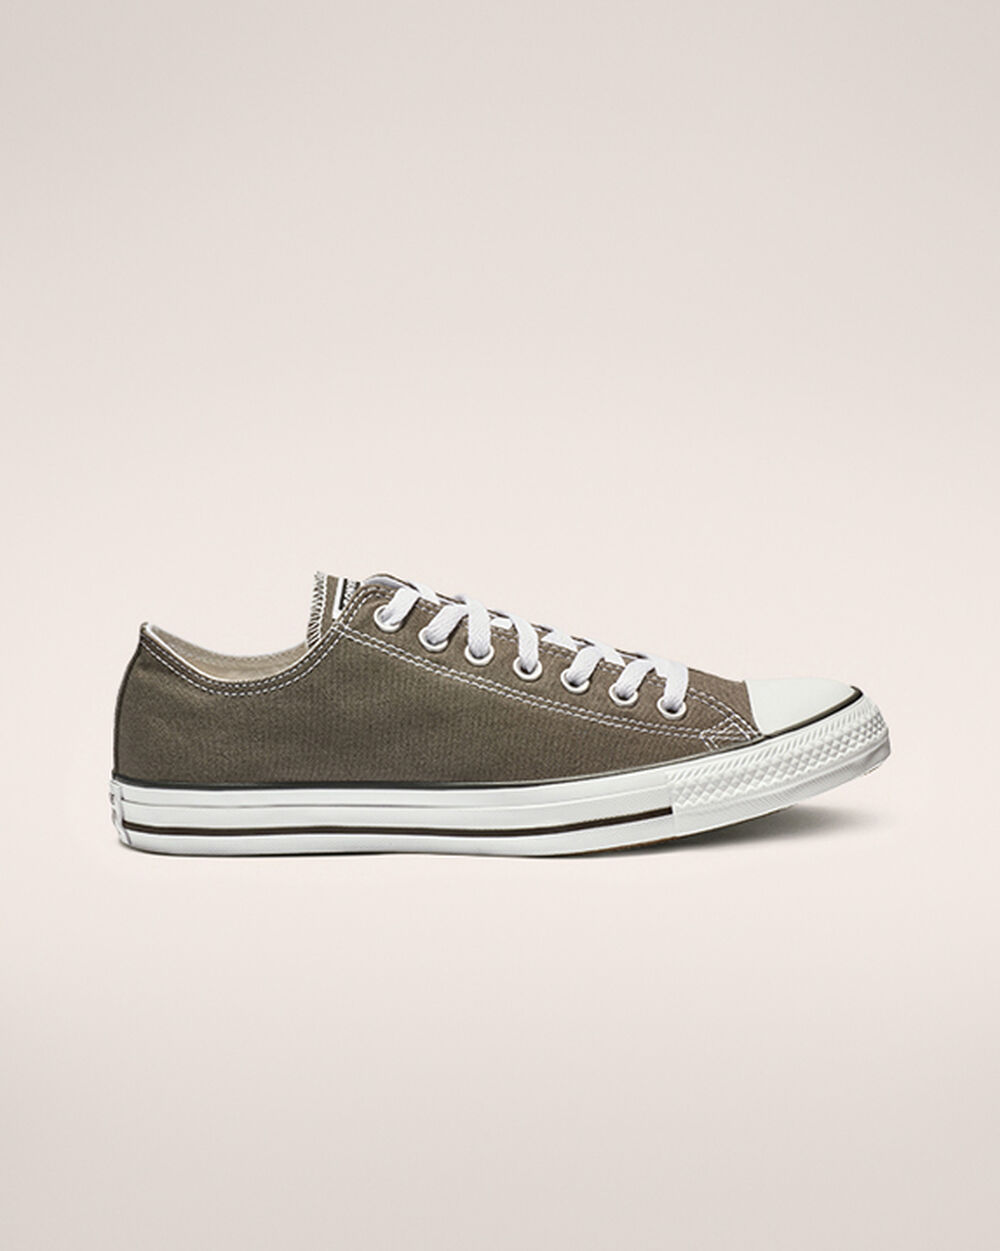 Tenis Converse Chuck Taylor All Star Mujer Grises Oscuro | Mexico-587016